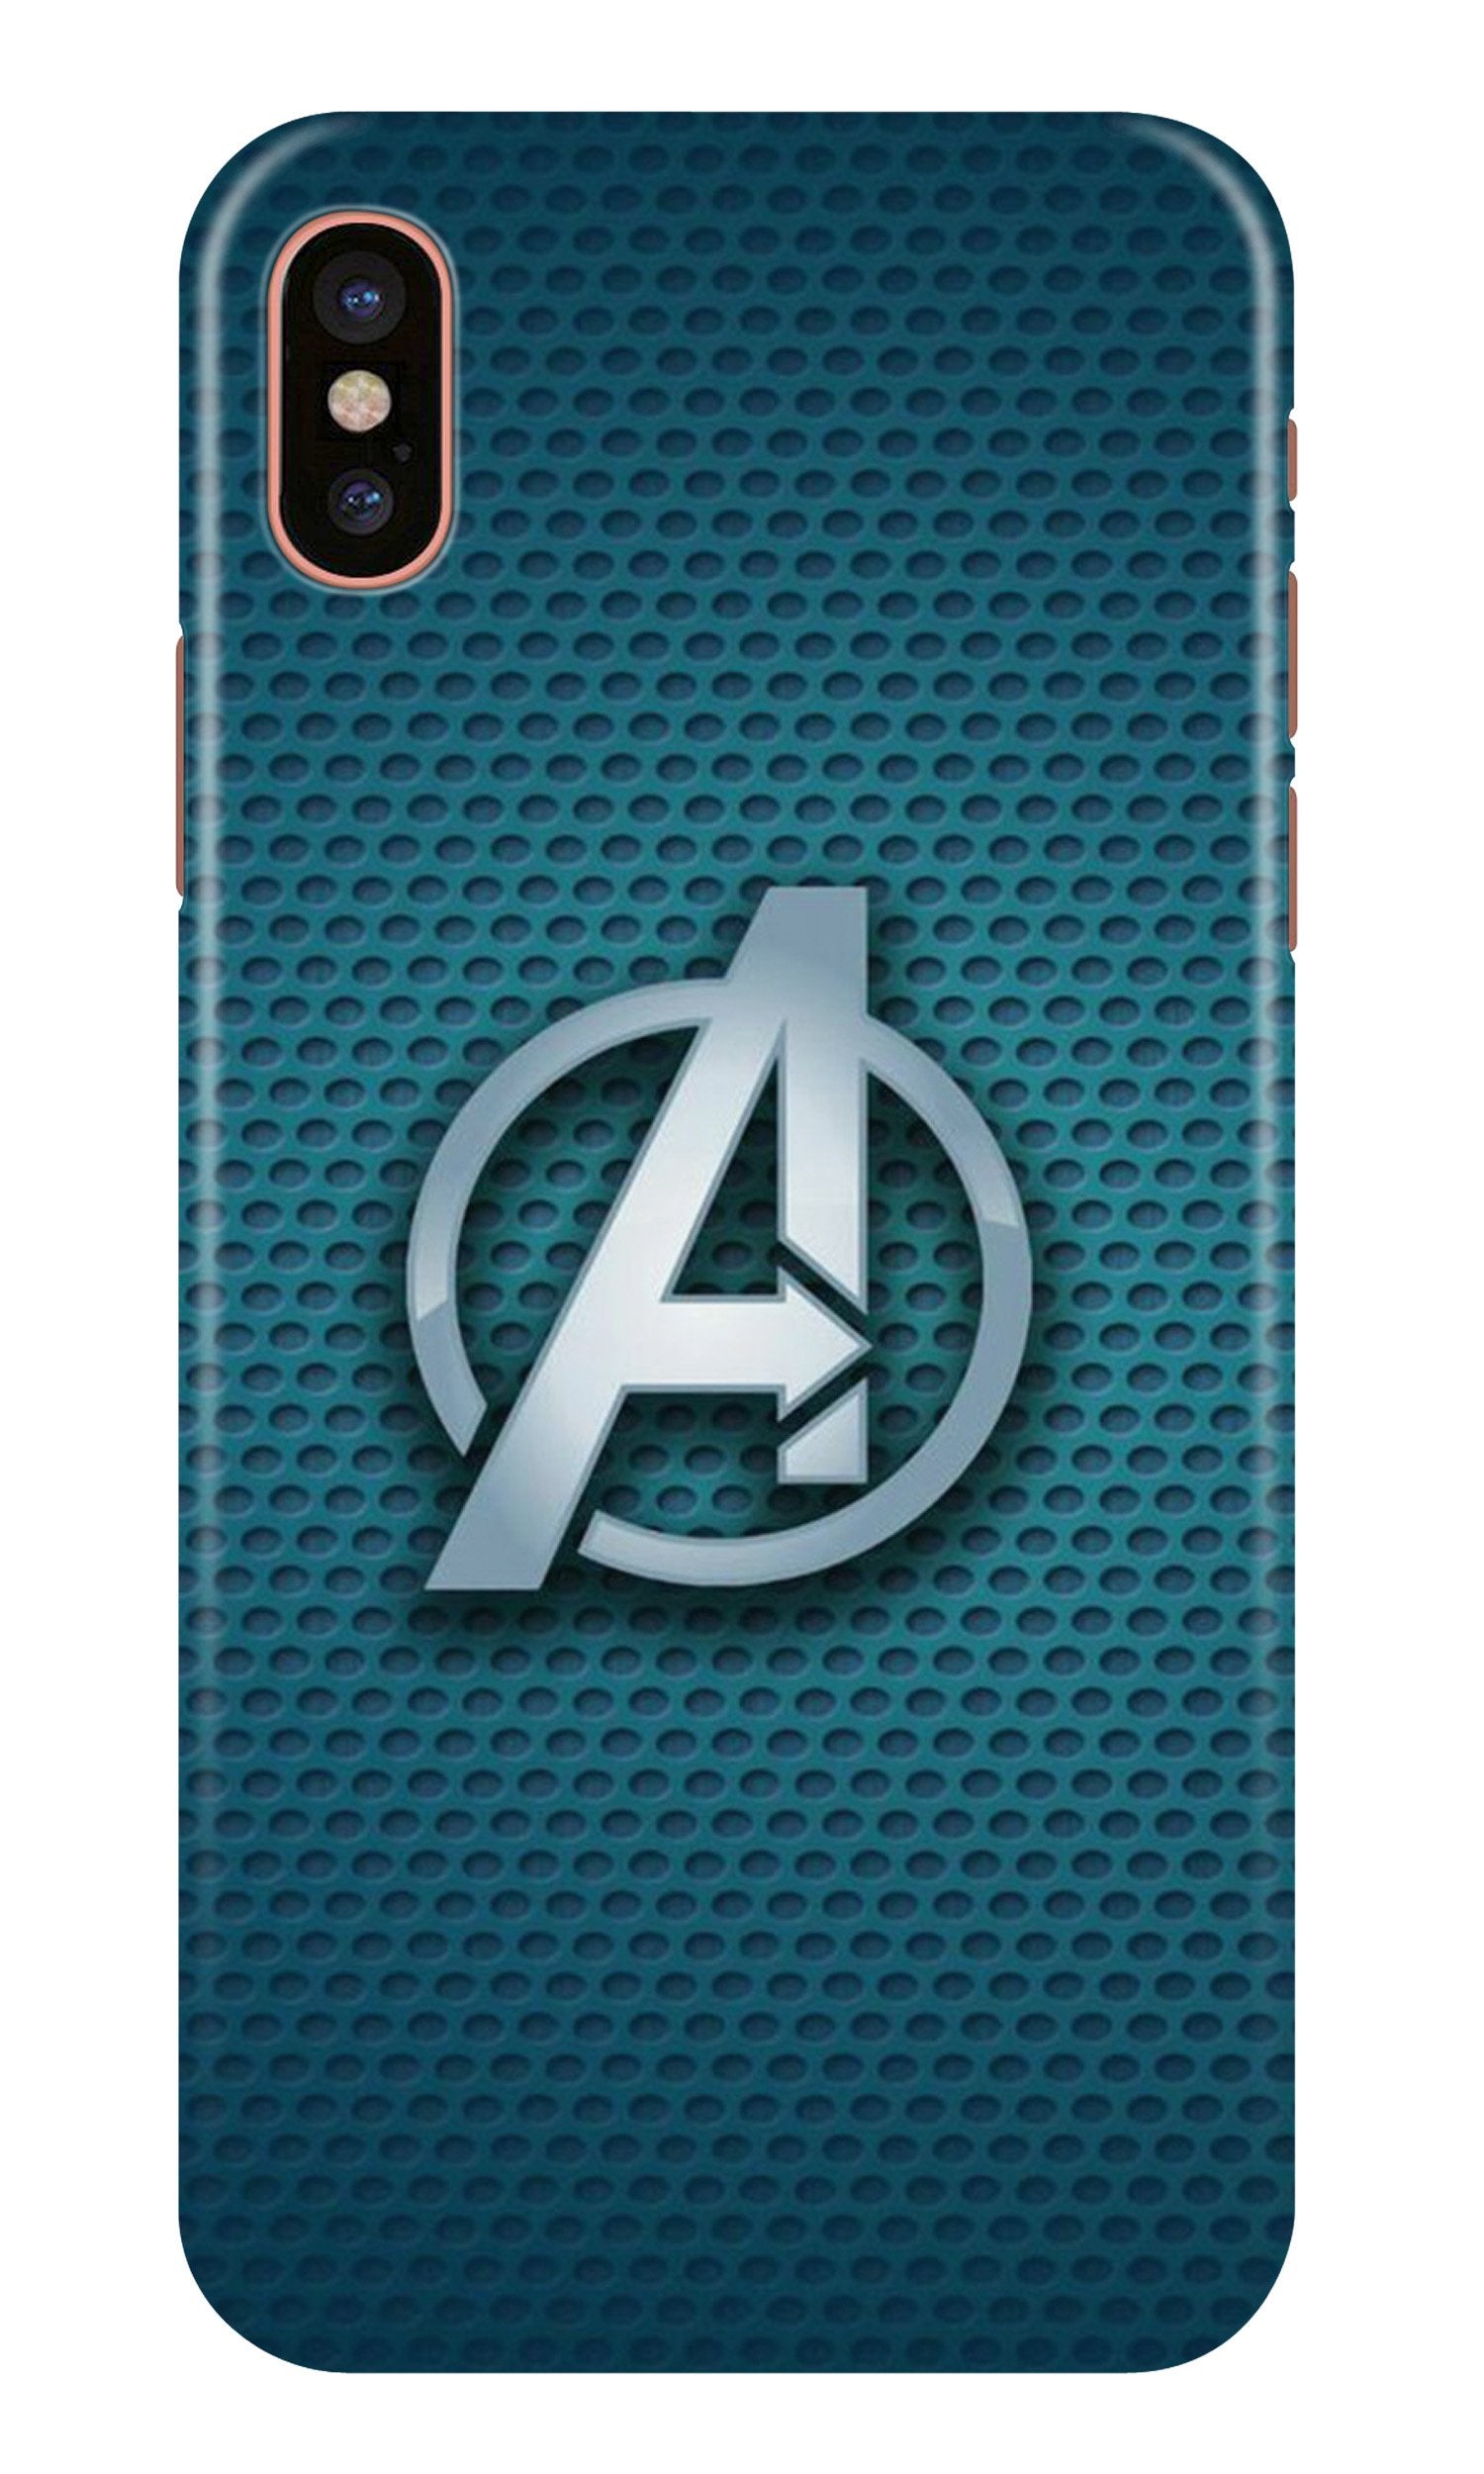 Avengers Case for iPhone Xs (Design No. 246)